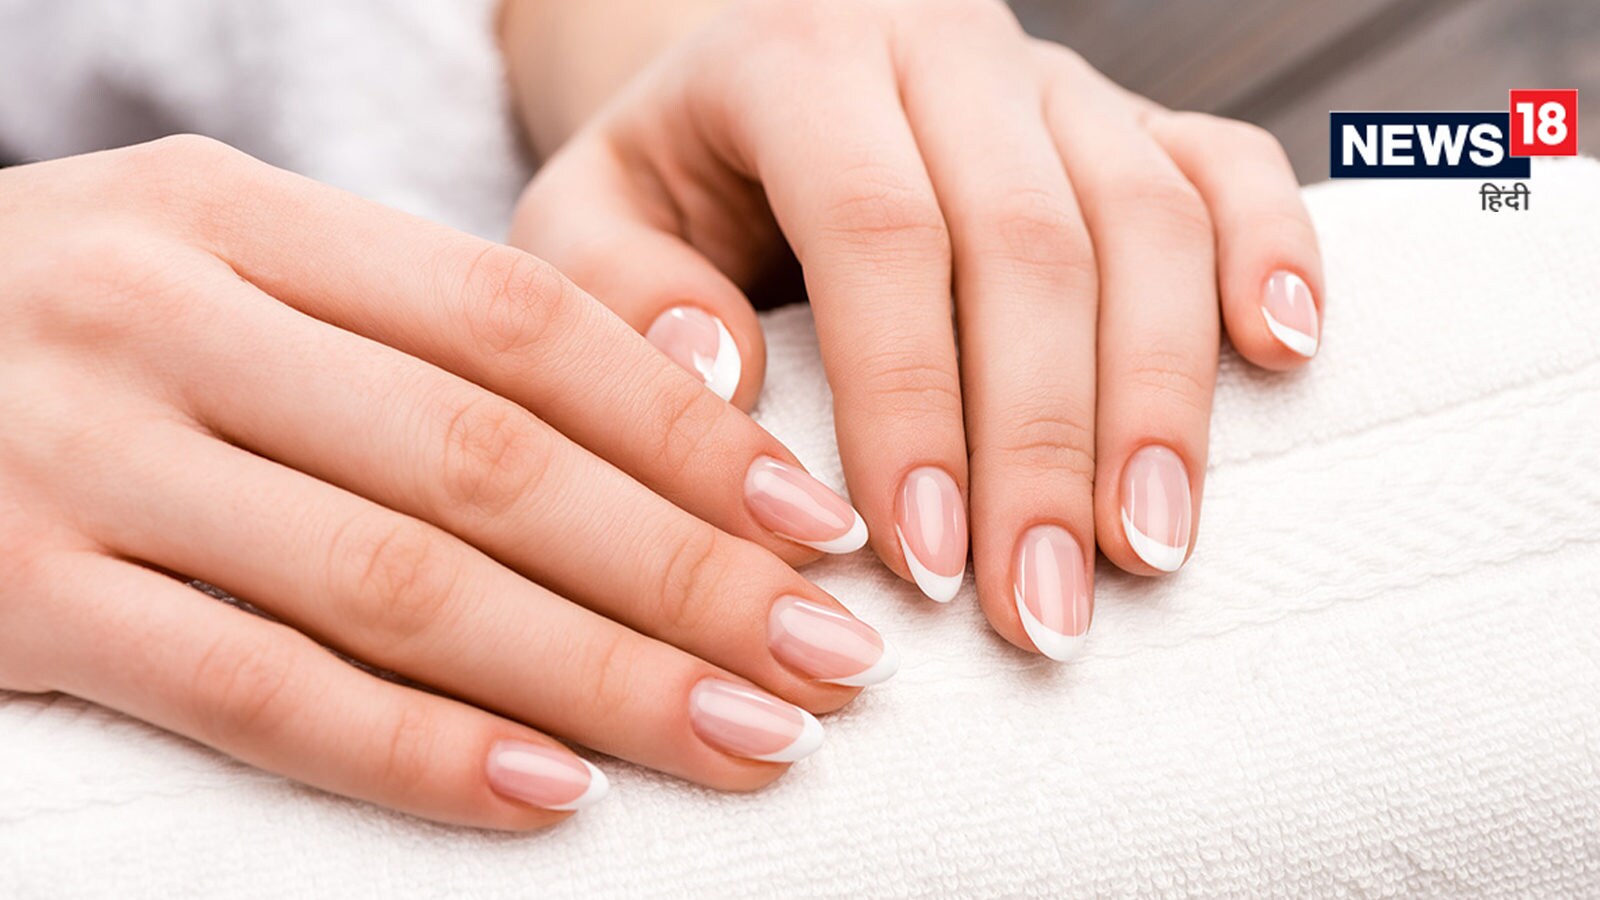 How to take care of your nails at home? Follow these tips | HealthShots